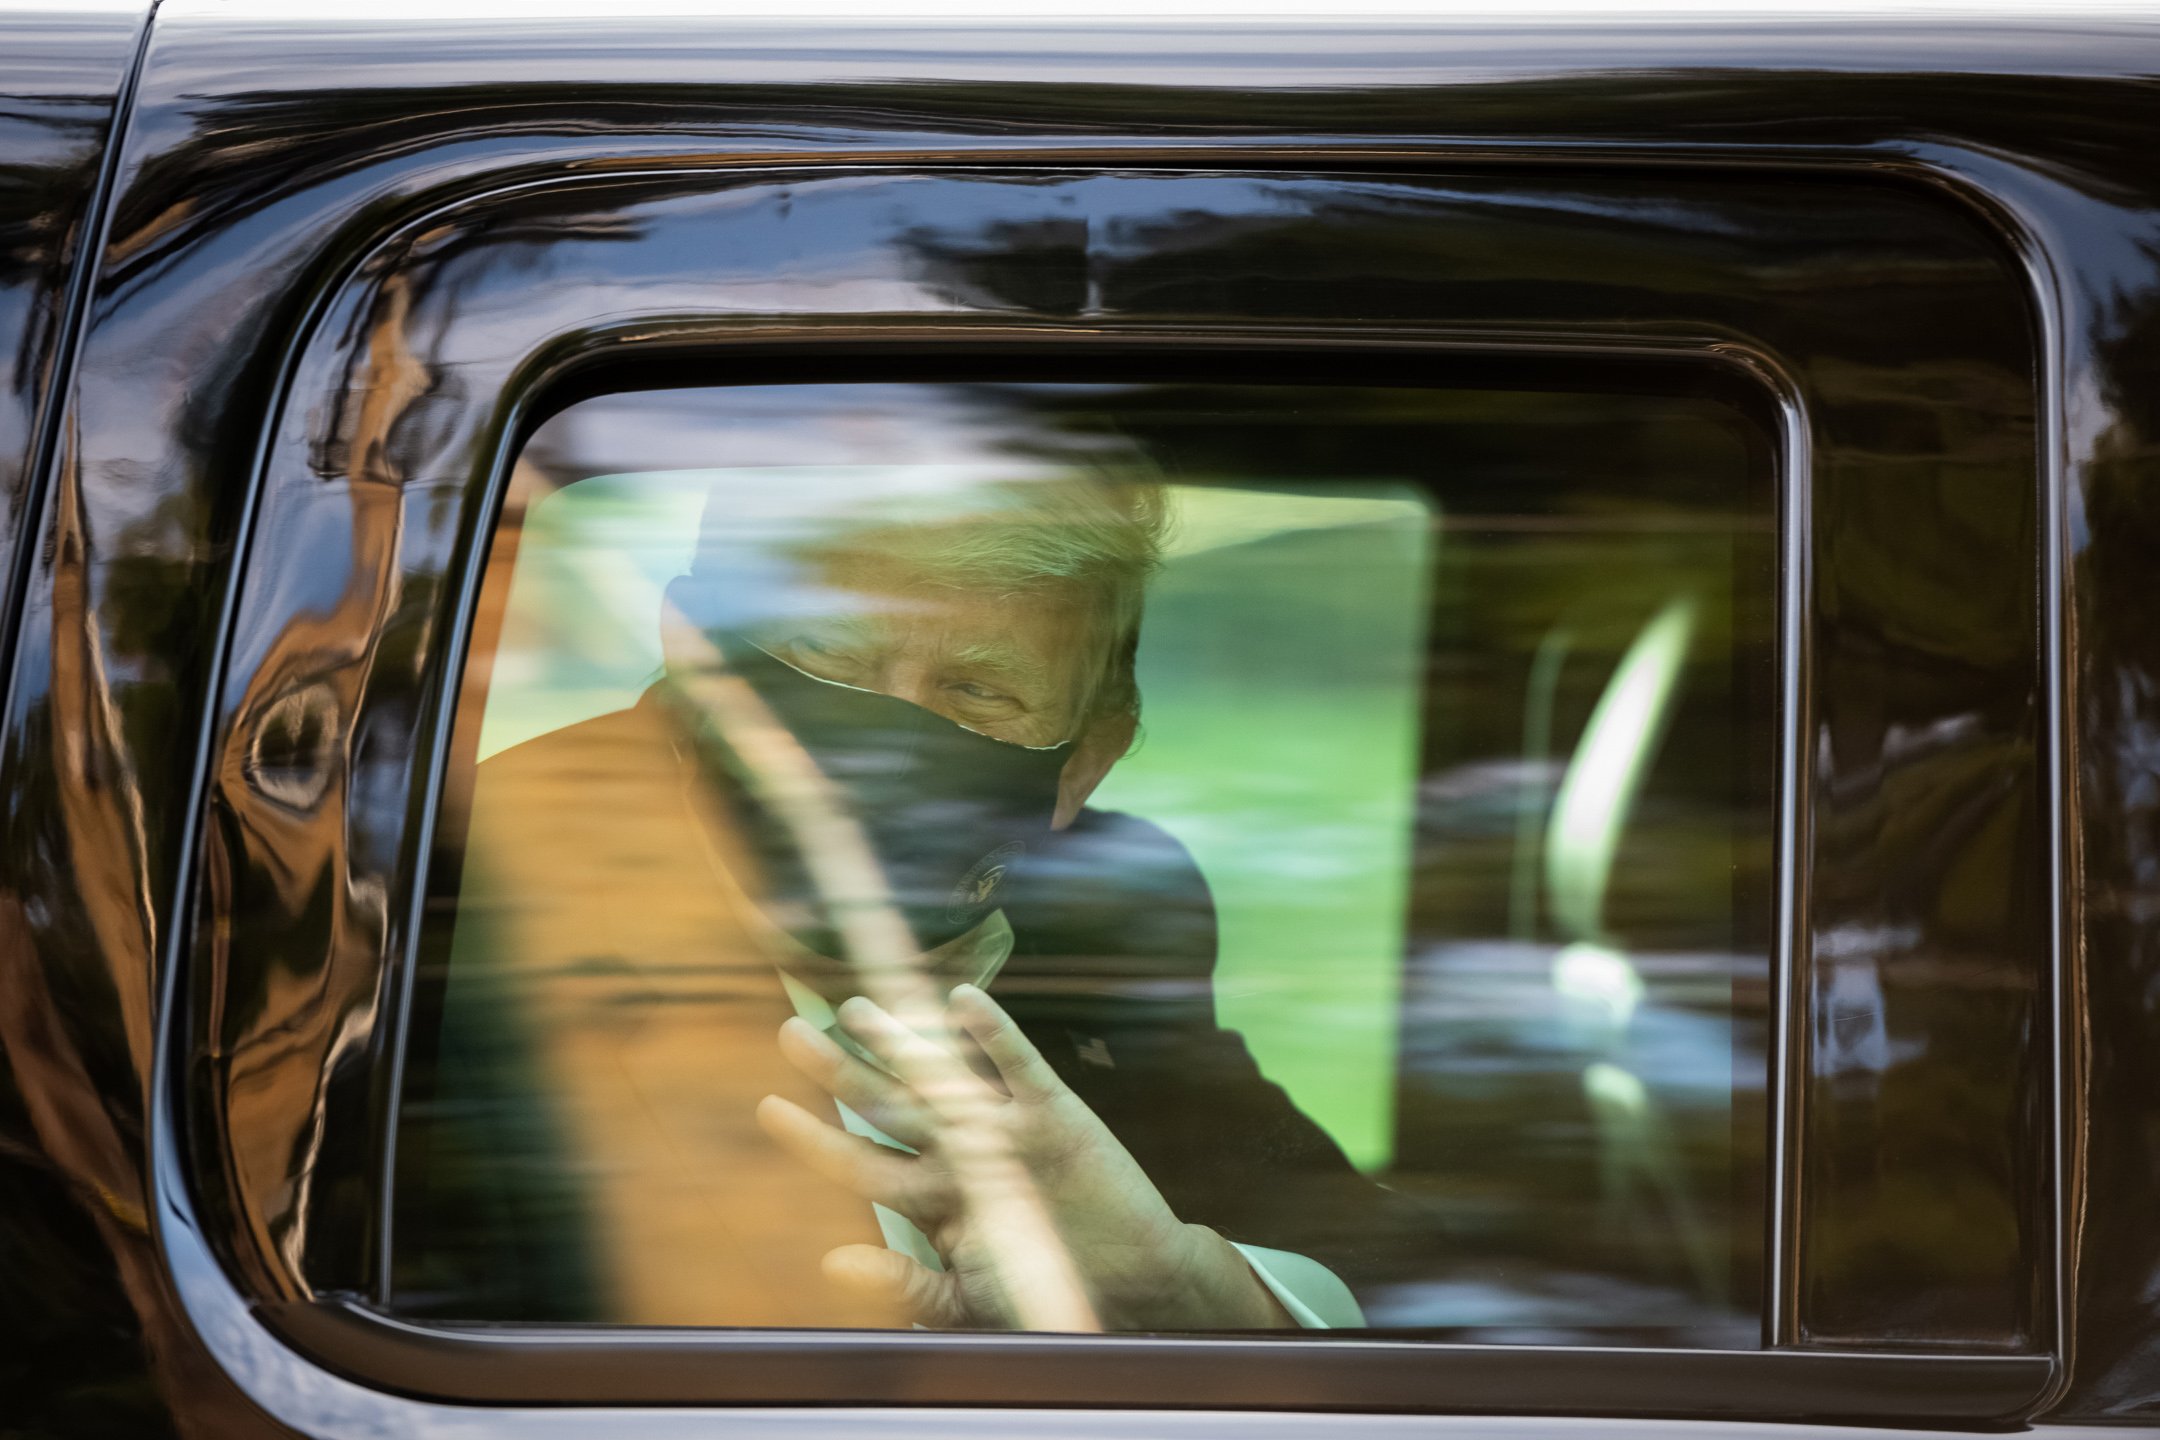  President Donald Trump wears a protective mask while waving as he is driven in a motorcade past supporters outside of Walter Reed National Military Medical Center, during his stay there after being diagnosed with COVID-19, in Bethesda, MD, on Octobe